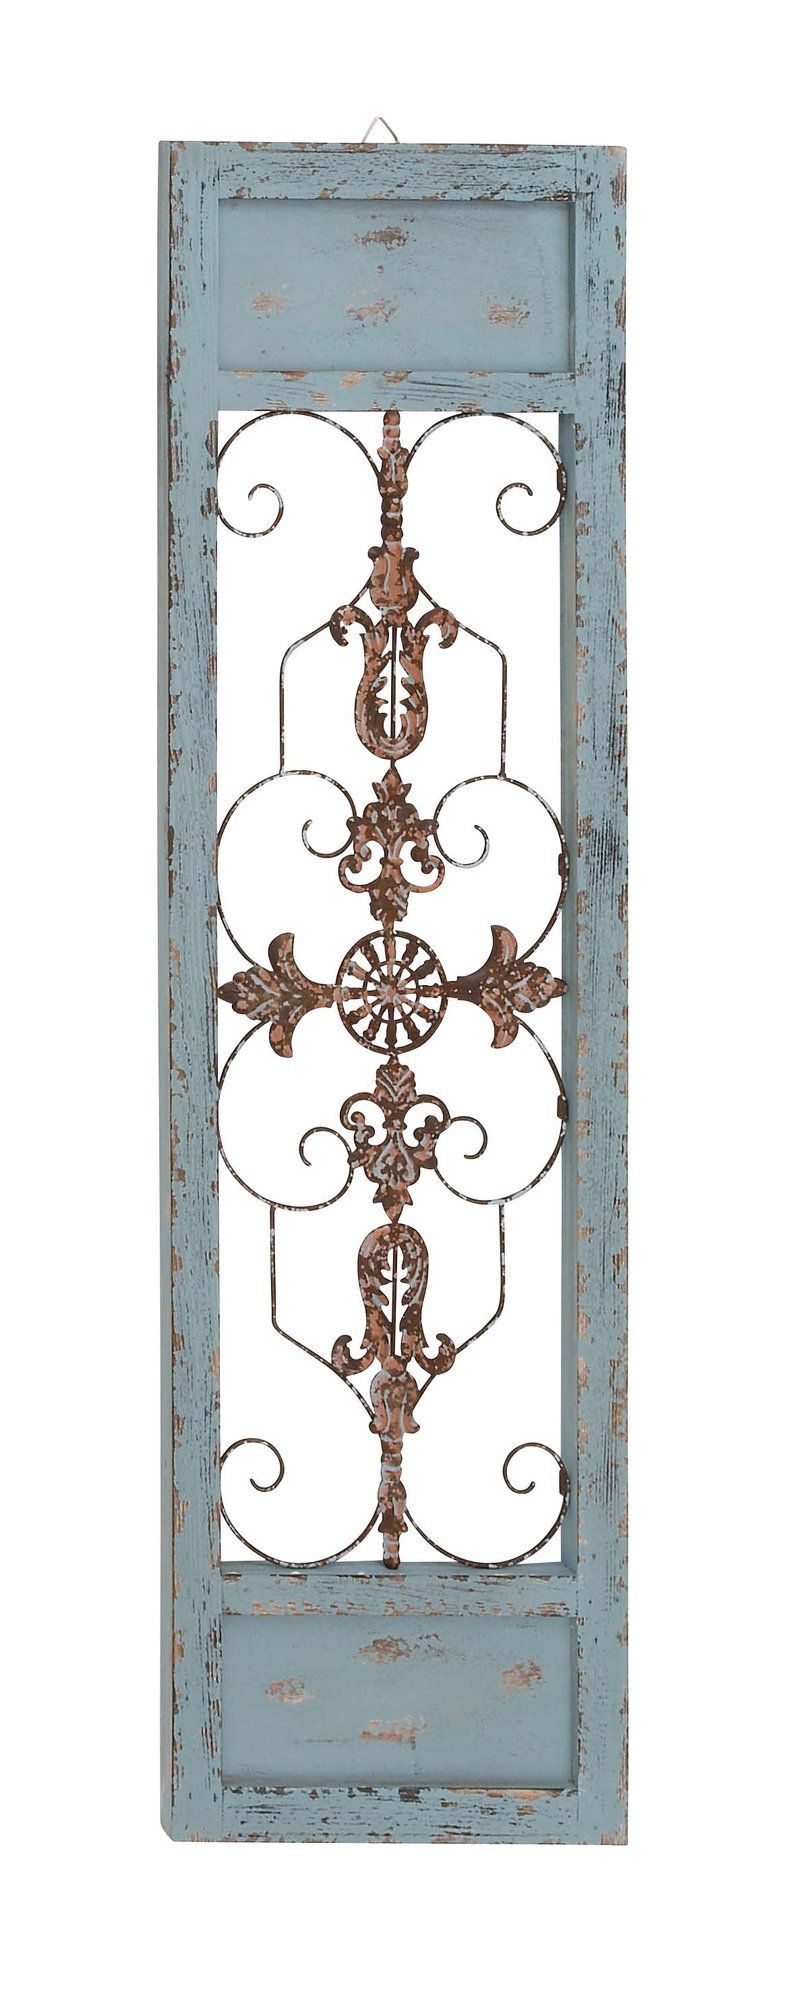 Ornamental Wood And Metal Scroll Wall Décor | Decor | Wooden With Ornamental Wood And Metal Scroll Wall Decor (Photo 1 of 30)